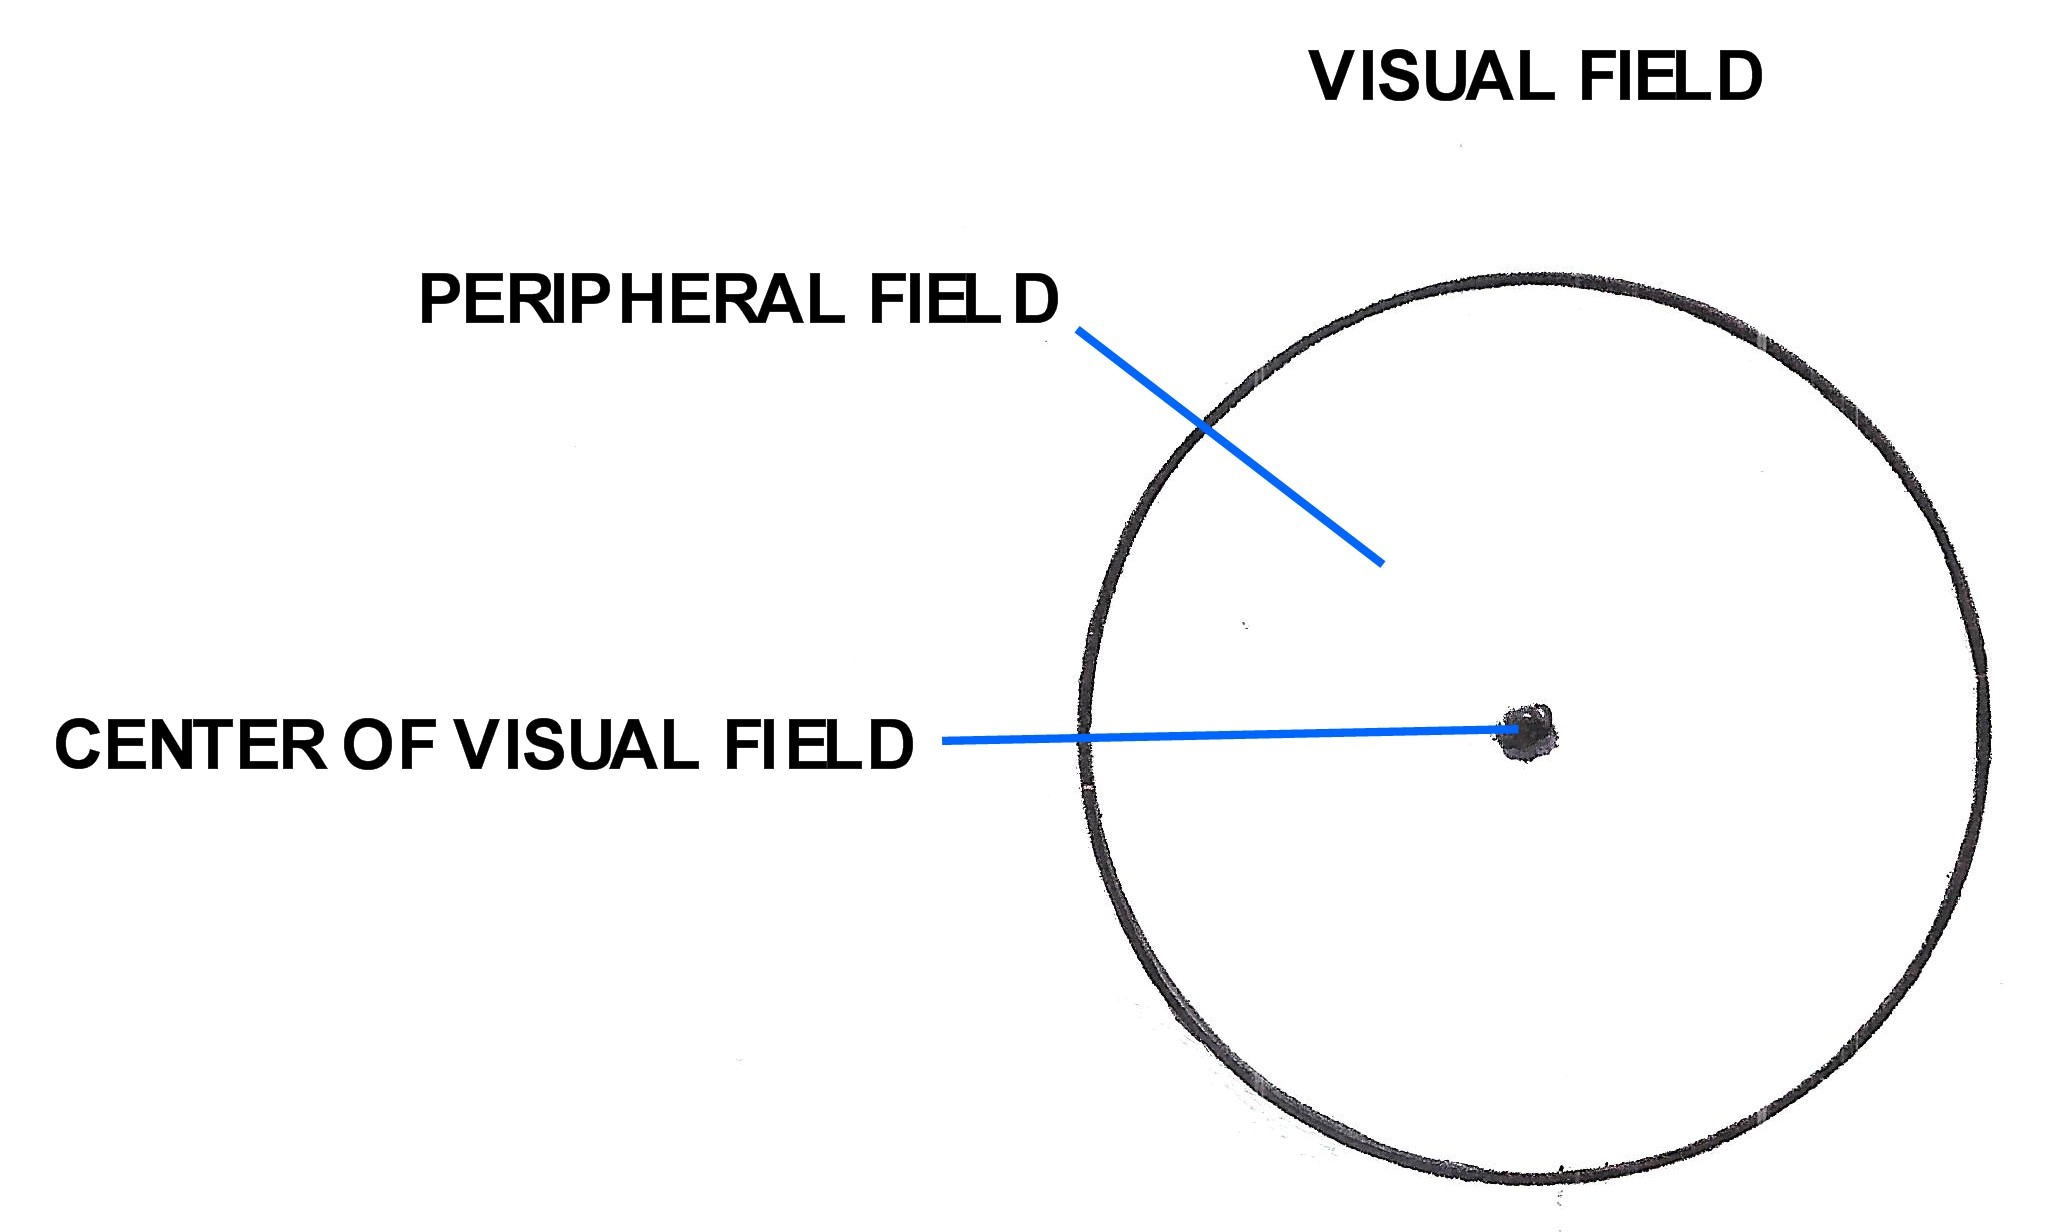 CENTER OF THE VISUAL FIELD